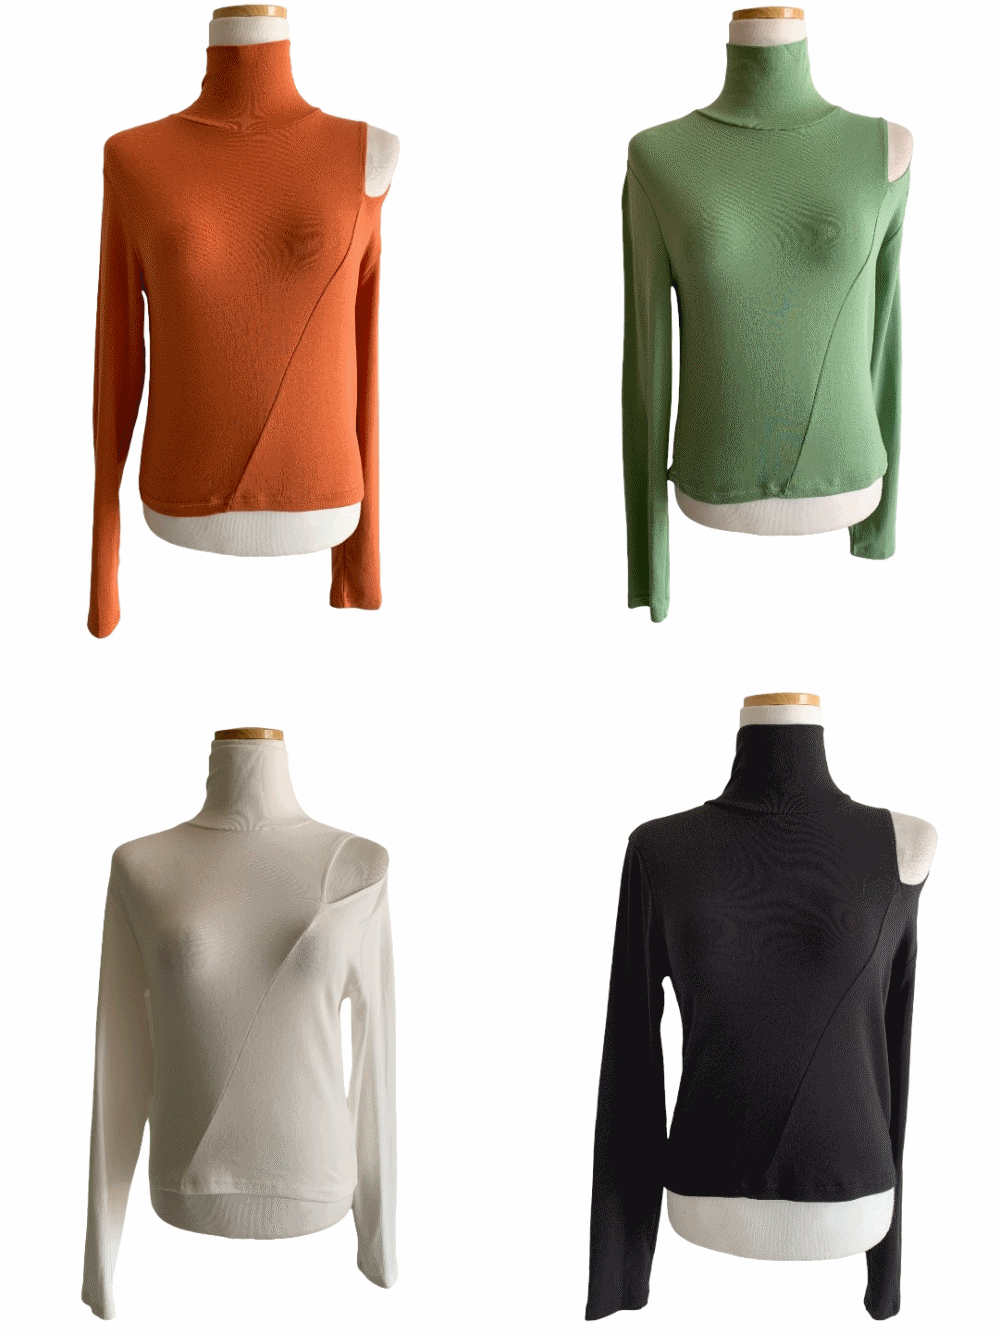 [Top] Bambi Slit Poloneck T. / 4 colors